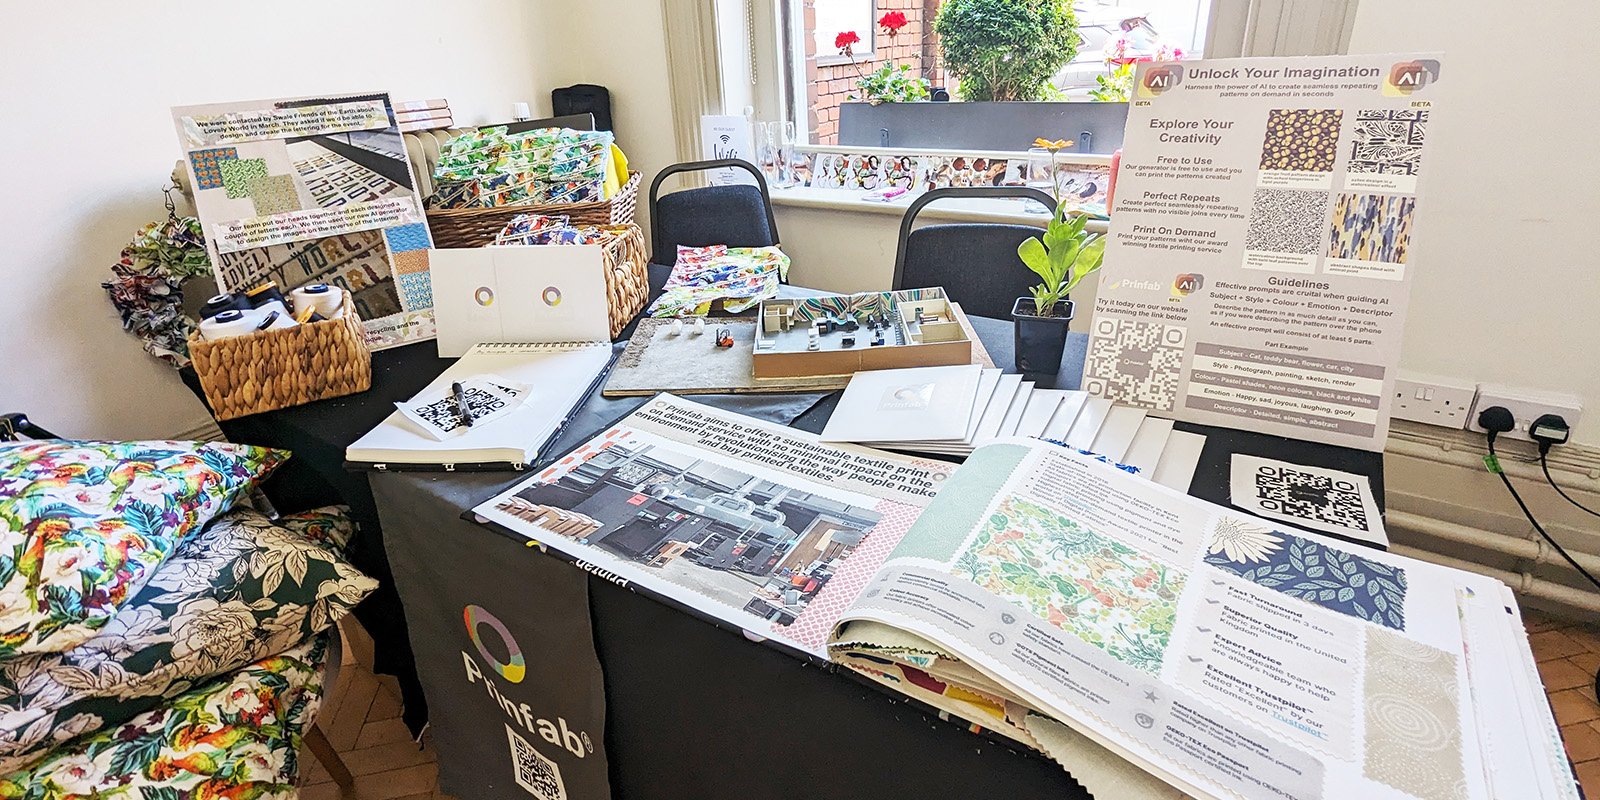 Photo of the Prinfab stand at the Lovely World event in Faversham